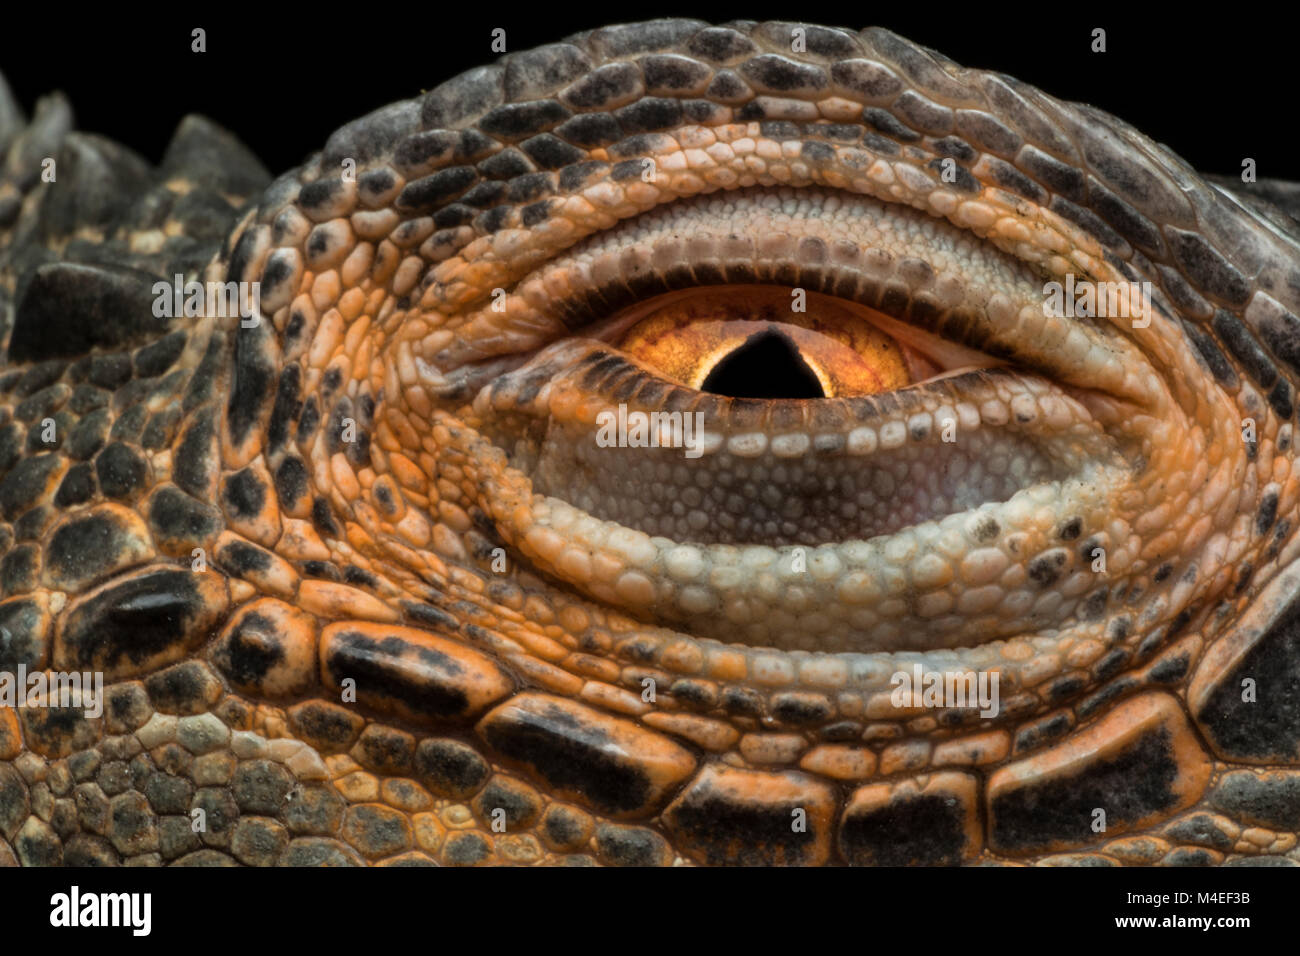 Close-up of a lizard's eye, Indonesia Stock Photo